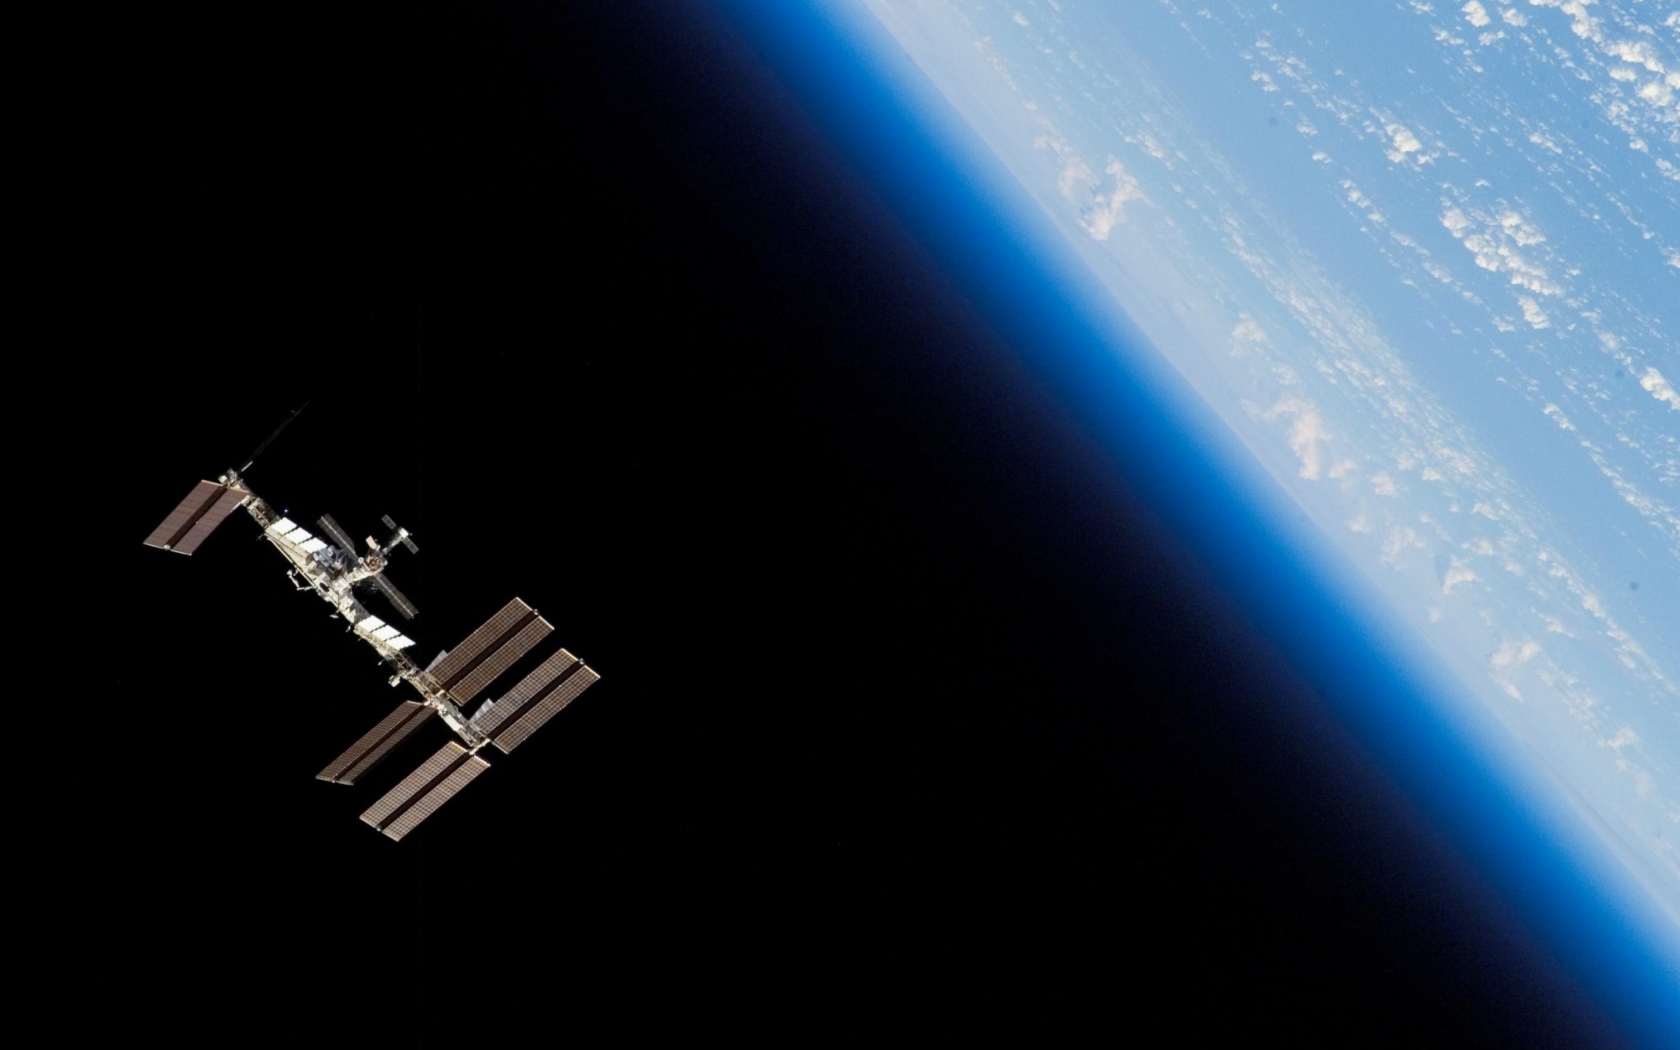 The ISS In Space screenshot #1 1680x1050